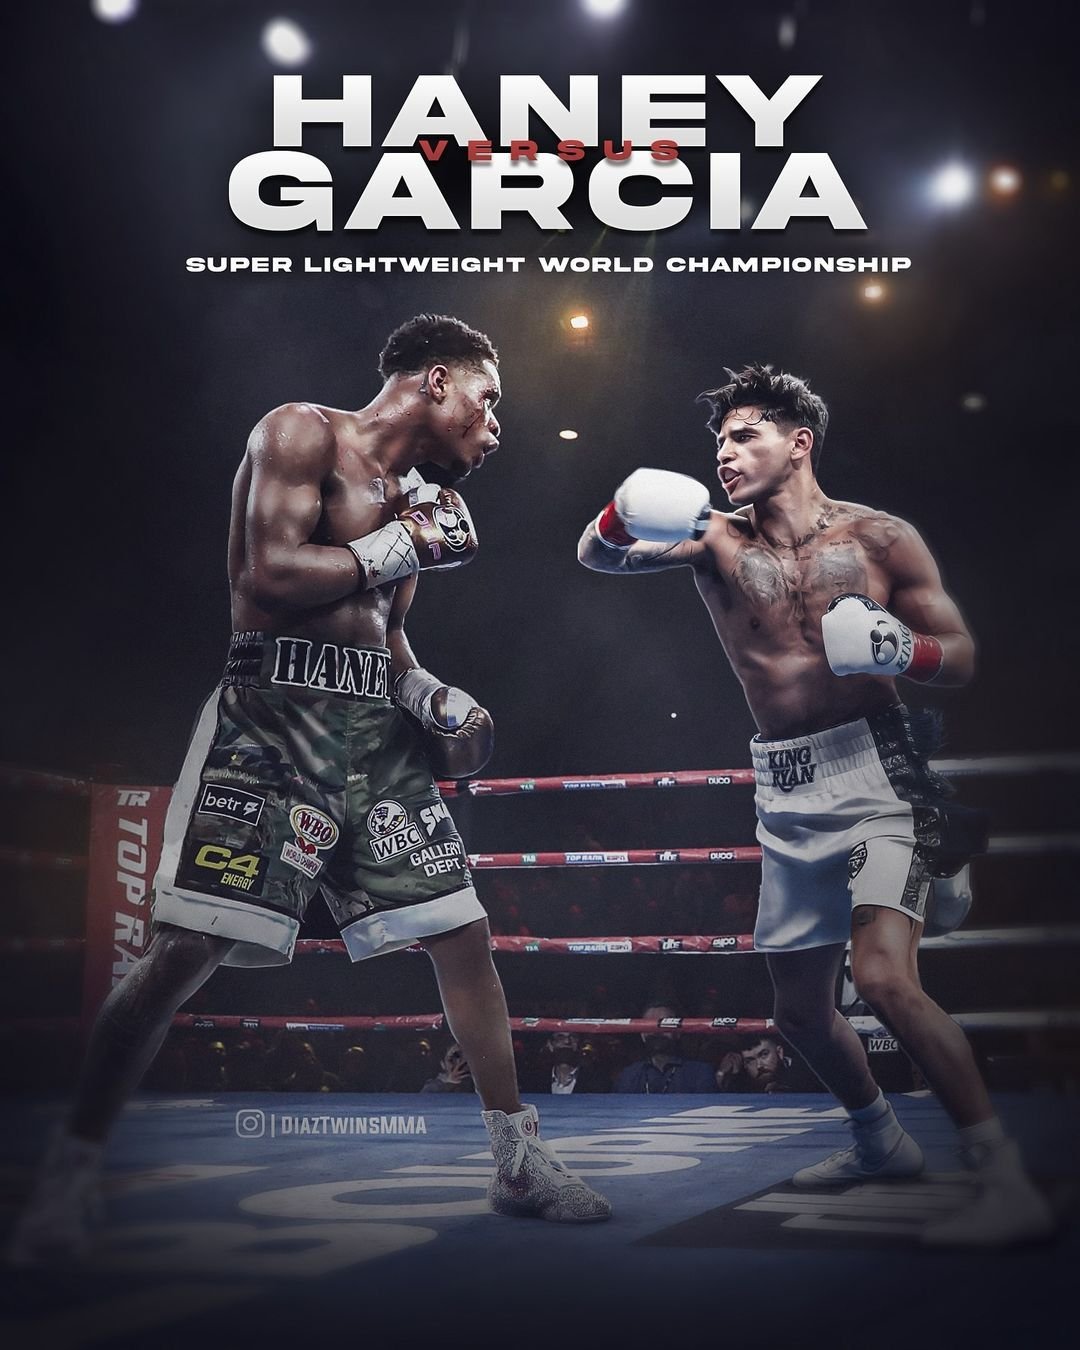 Haney vs. Garcia happening this Saturday, April 20th! 🥊 No better place to watch the fight than at ACO.

Get your tickets now at theacoakland.com 🎫 

Undefeated, former undisputed lightweight champion and current WBC Super Lightweight Champion Devi